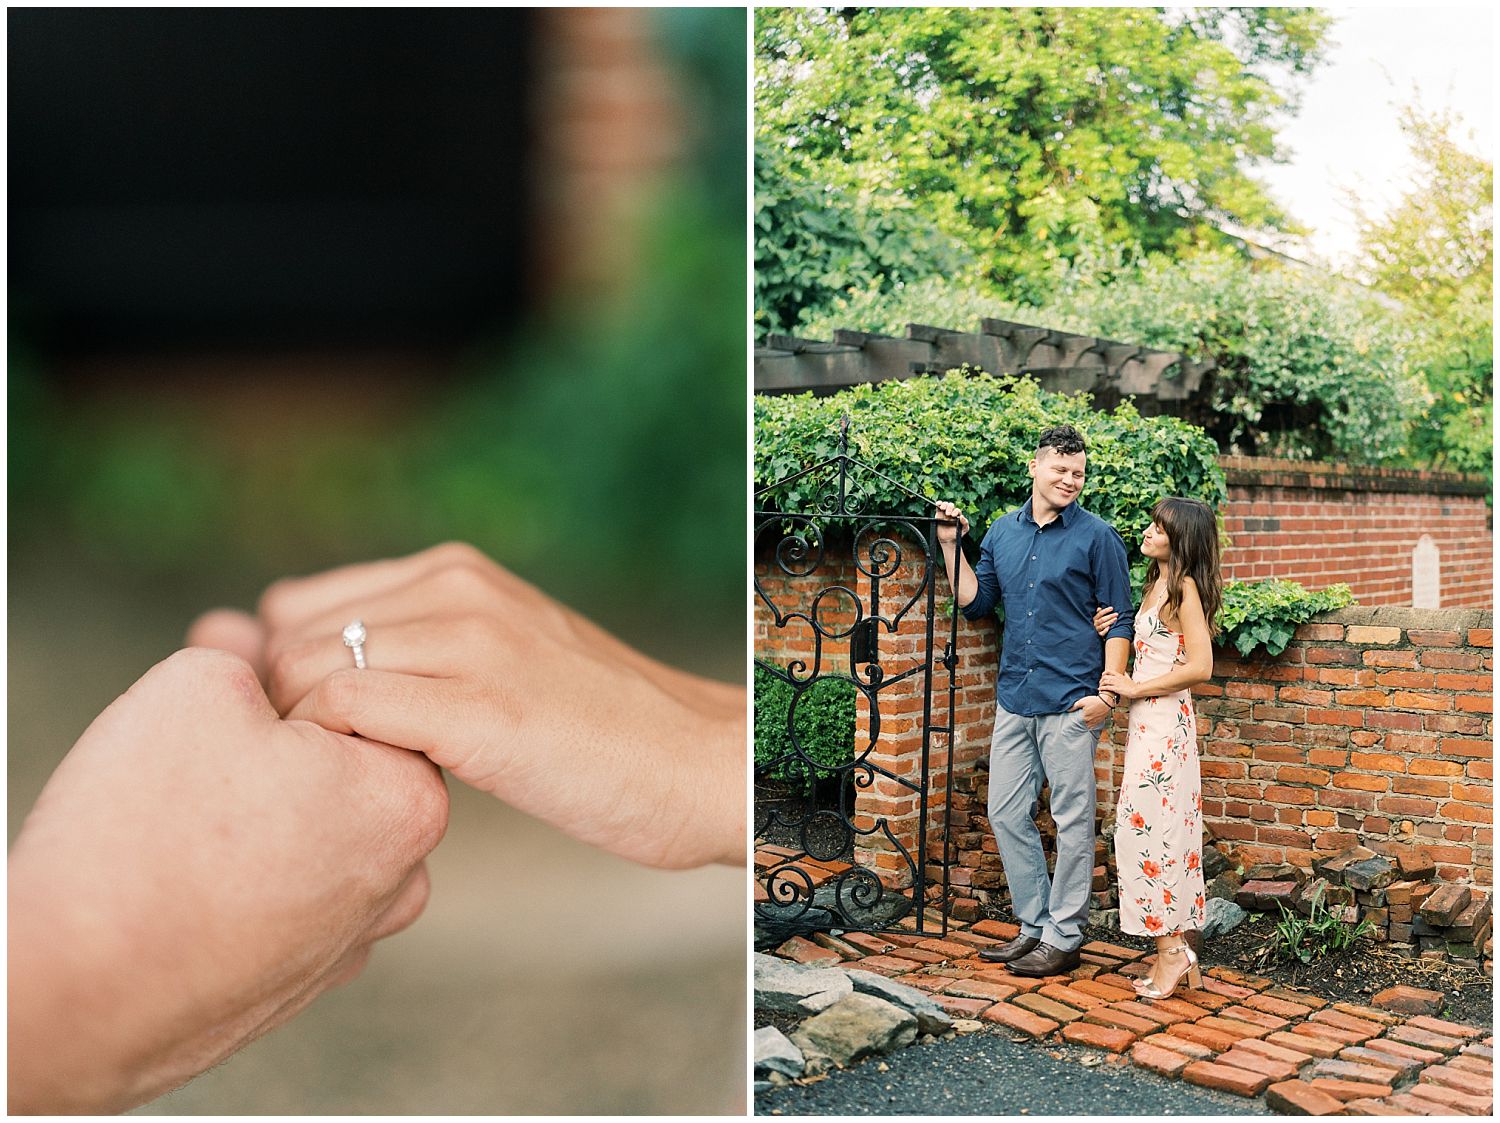 Old Town Alexandria engagement session photography